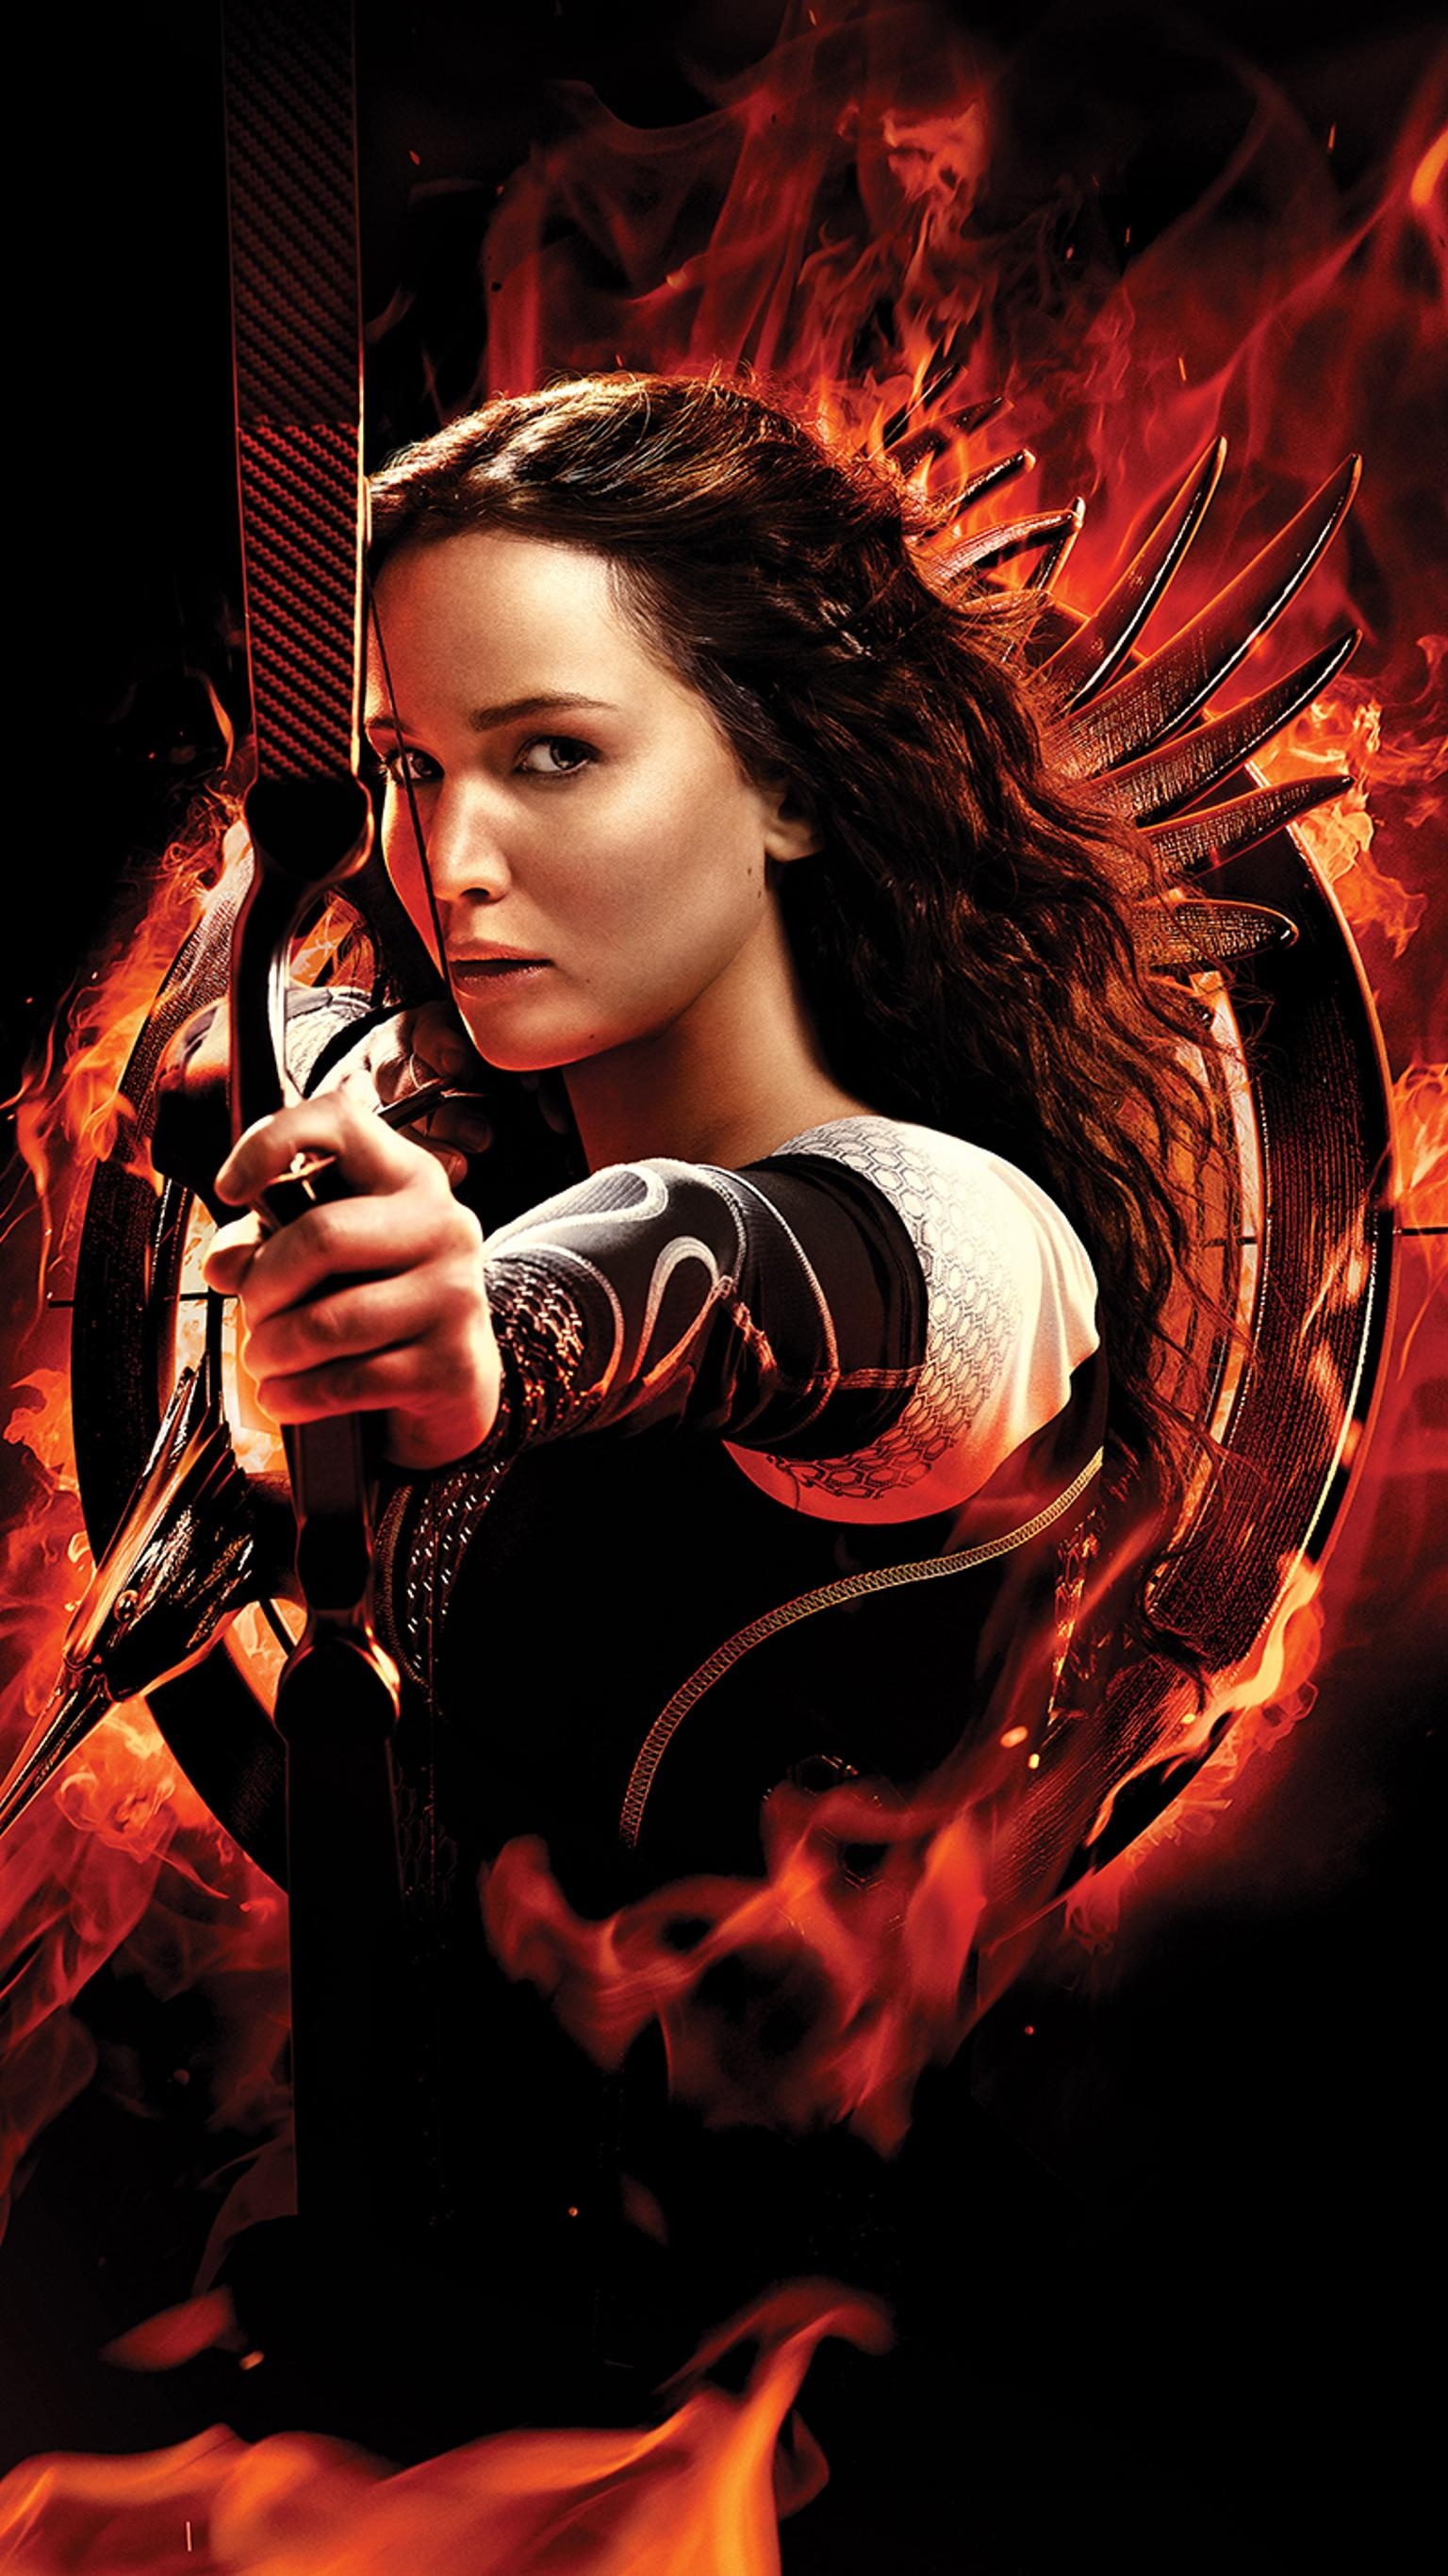 Hunger Games: Katniss Everdeen, A movie franchise based on a series of books by Suzanne Collins. 1540x2740 HD Wallpaper.